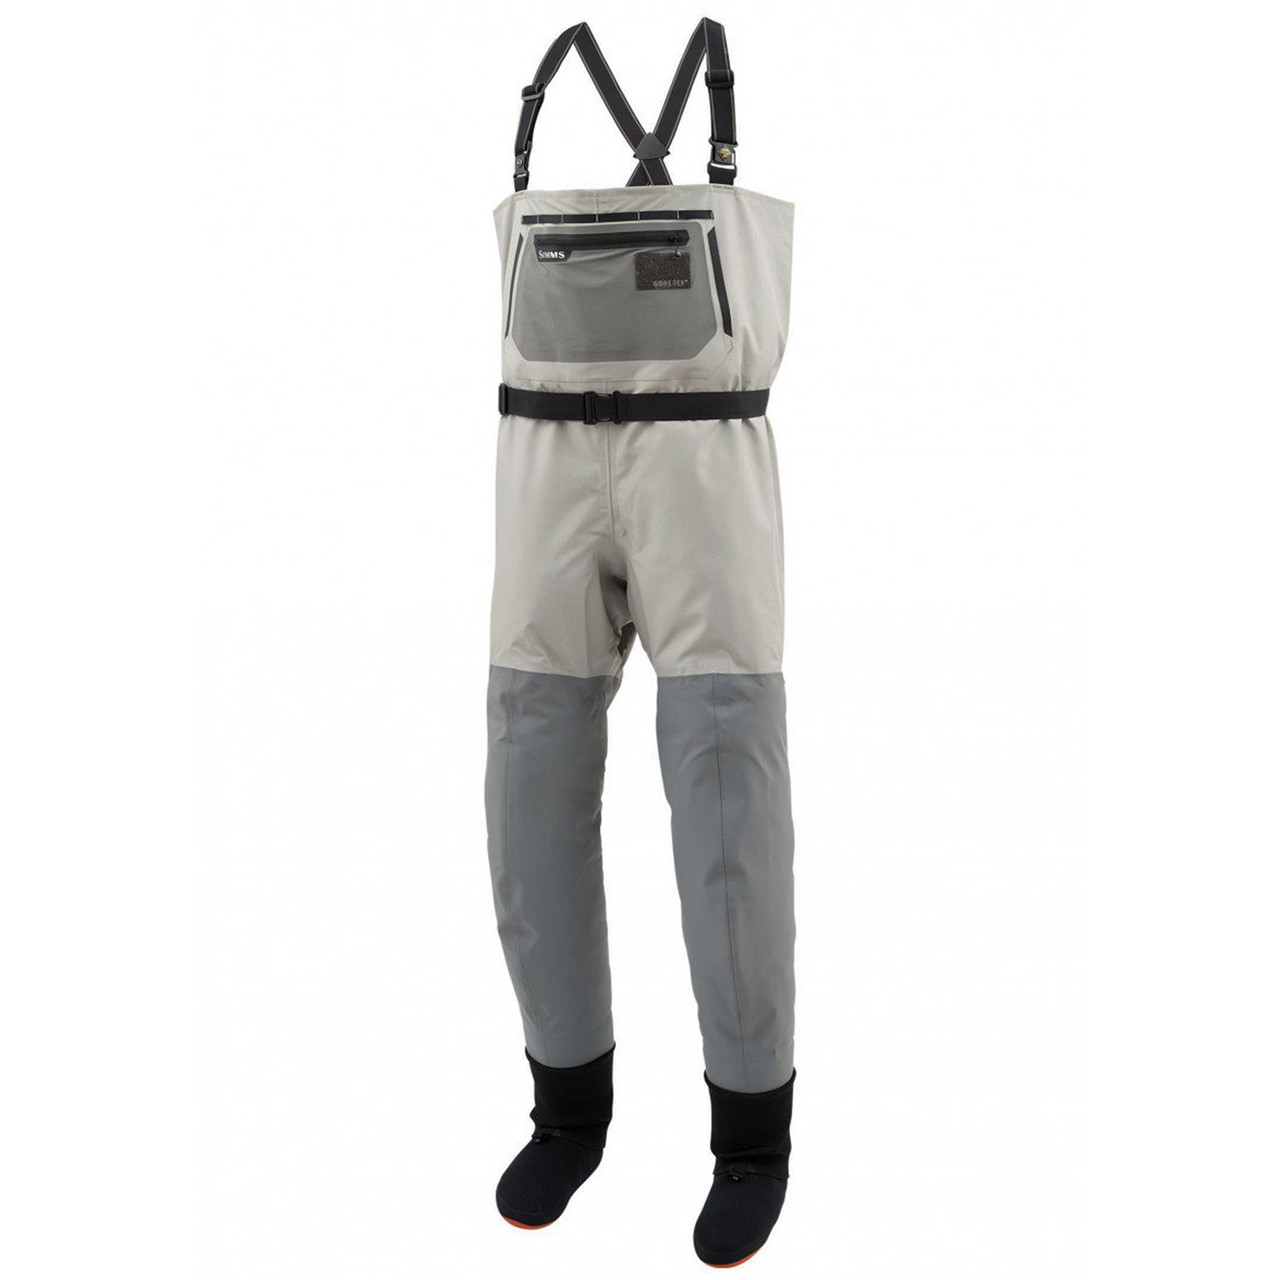 Men's Fishing Chest Waders Breathable Stocking Foot Wader Lightweight  Convertible Hunting Wading Pants Kit For Fly Fishing - Fishing Waders -  AliExpress